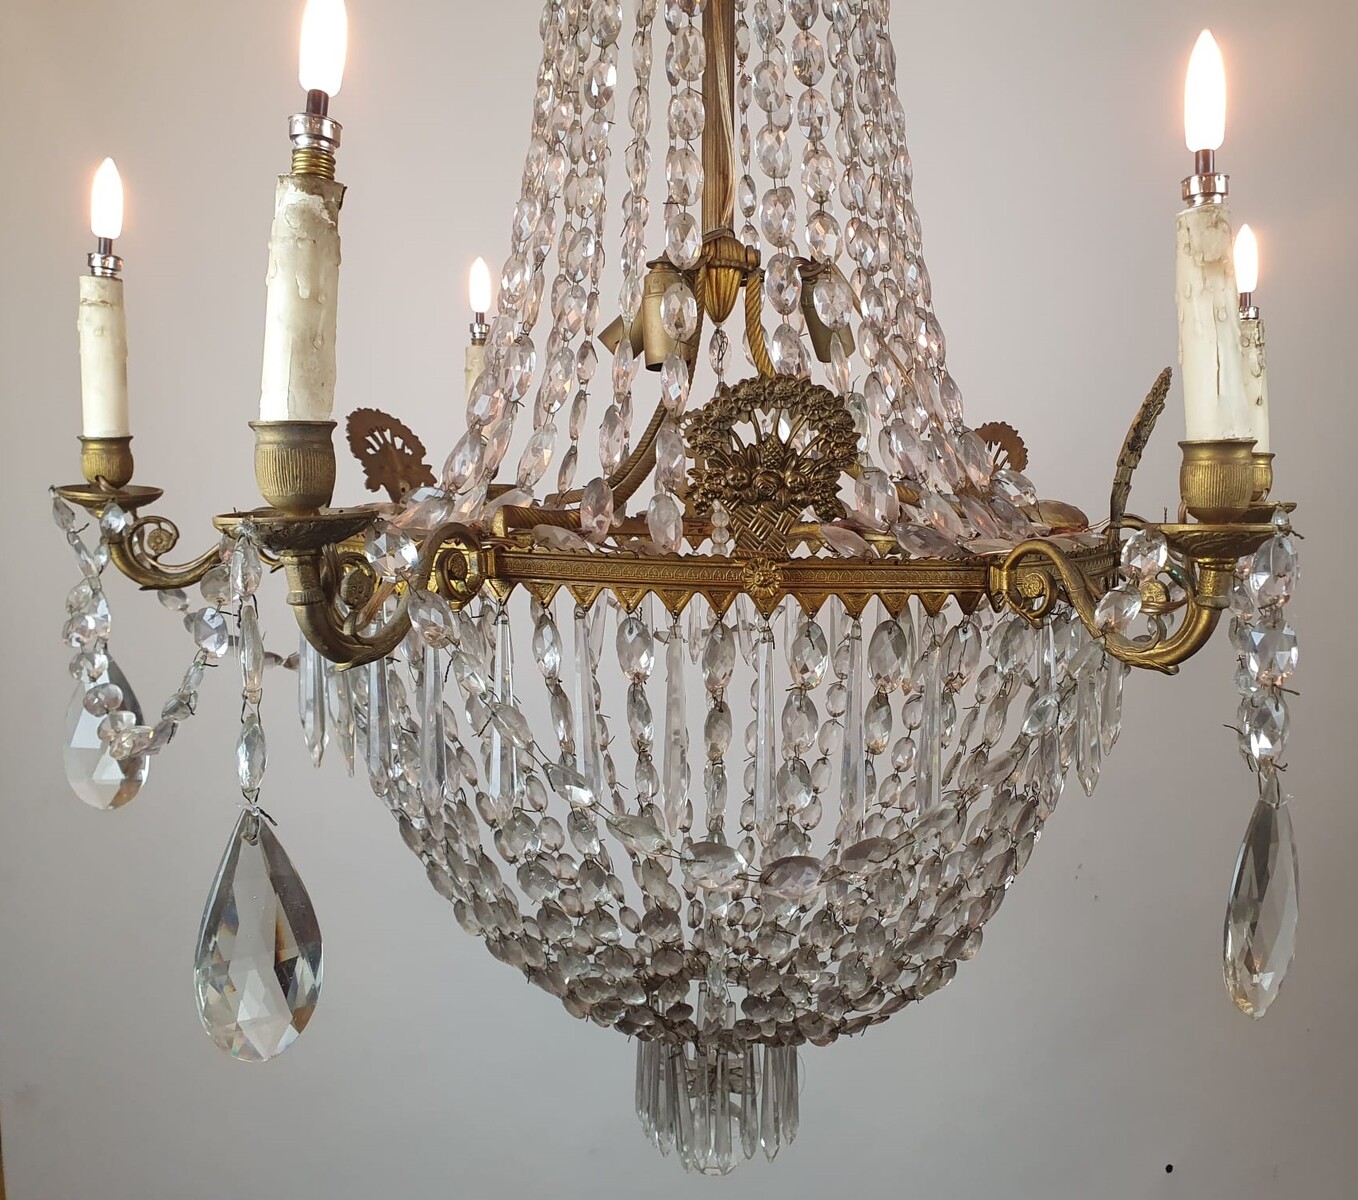 Beaded bag chandelier in bronze, brass and glass, 19th